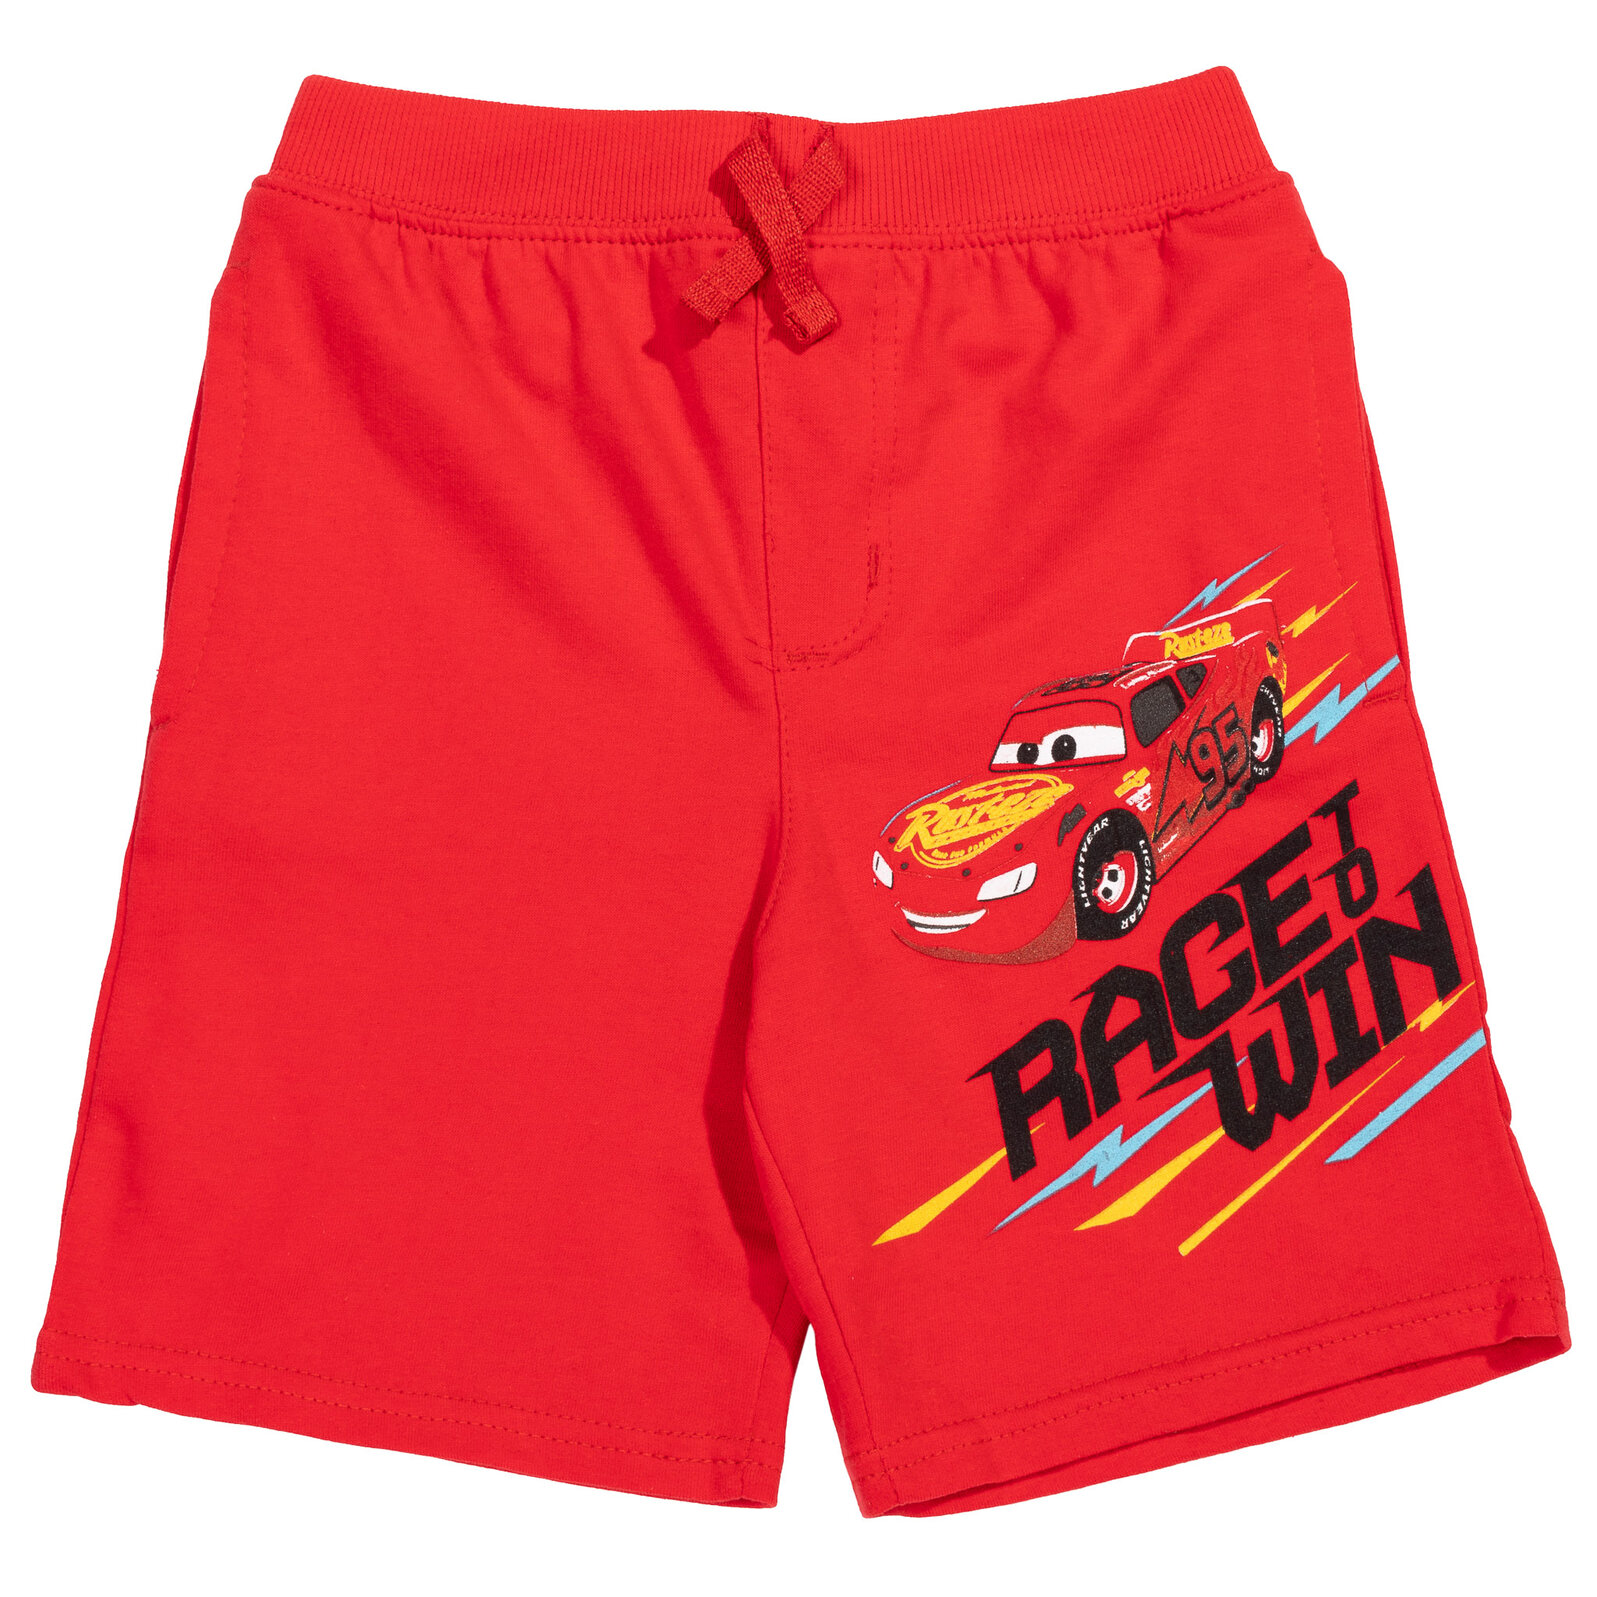 Disney Pixar Cars Lightning McQueen Toddler Boys French Terry 2 Pack Shorts Toddler to Little Kid - image 3 of 5